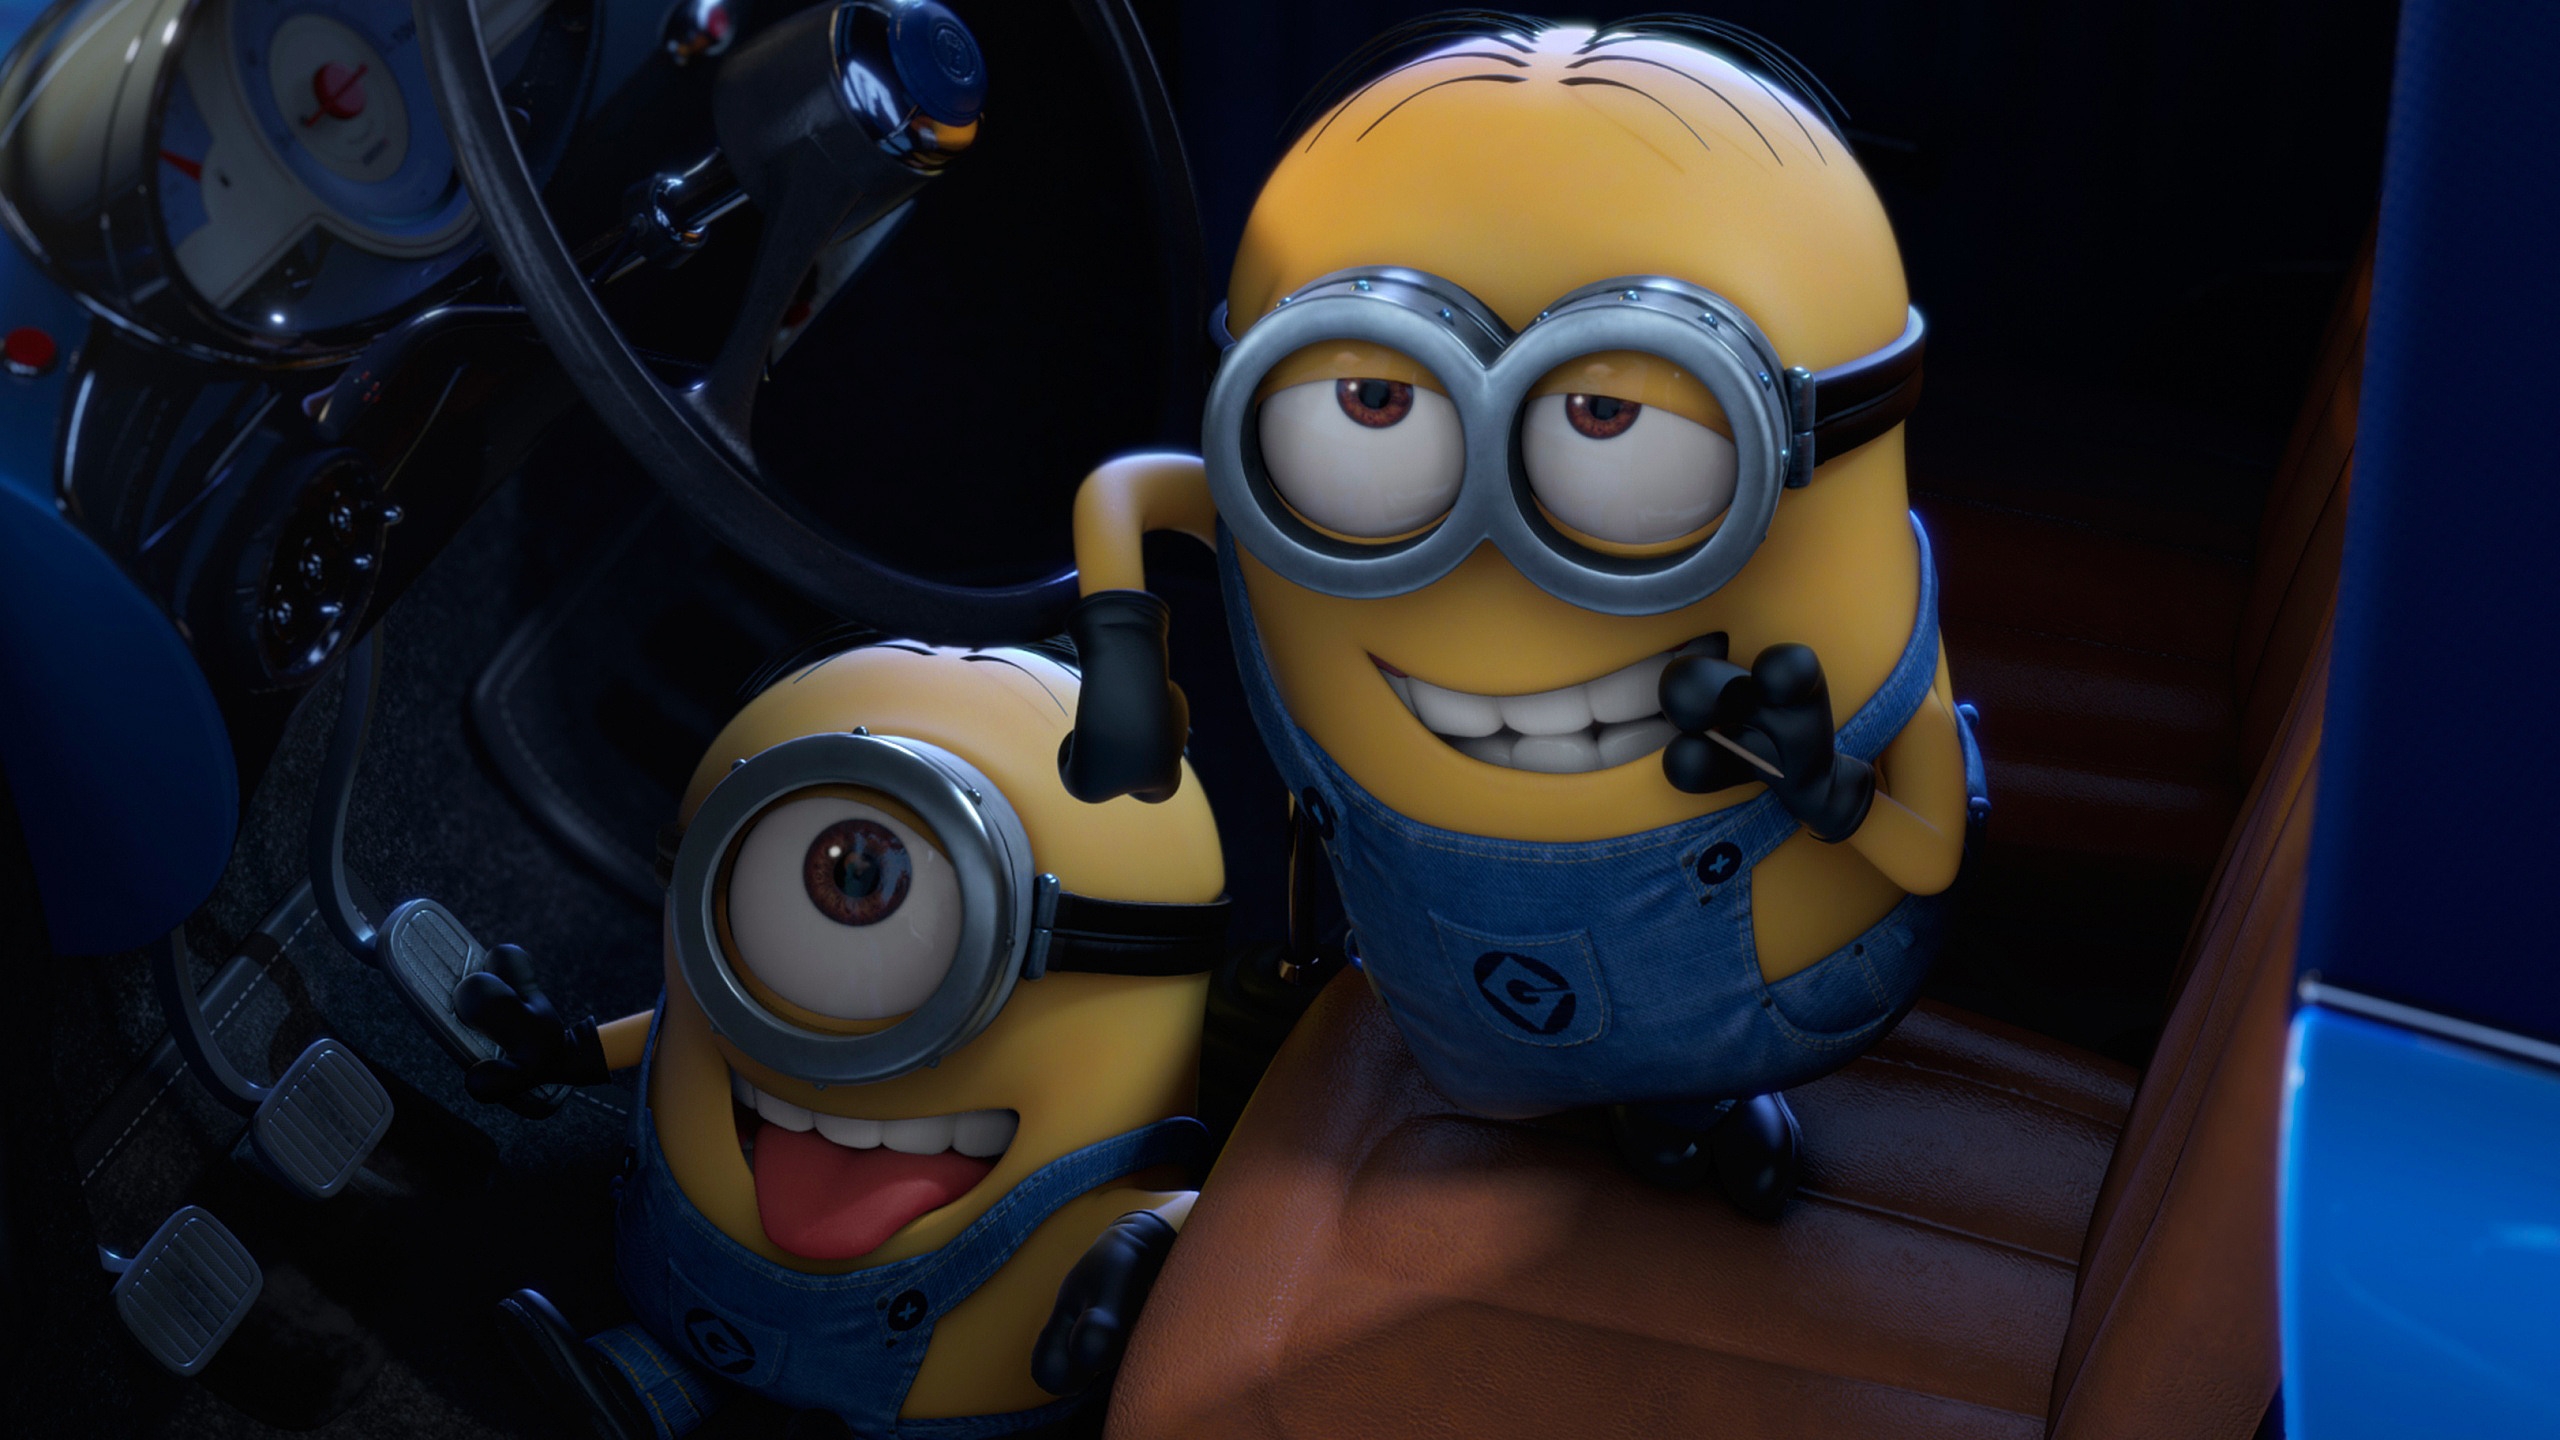 Minions for 2560x1440 HDTV resolution